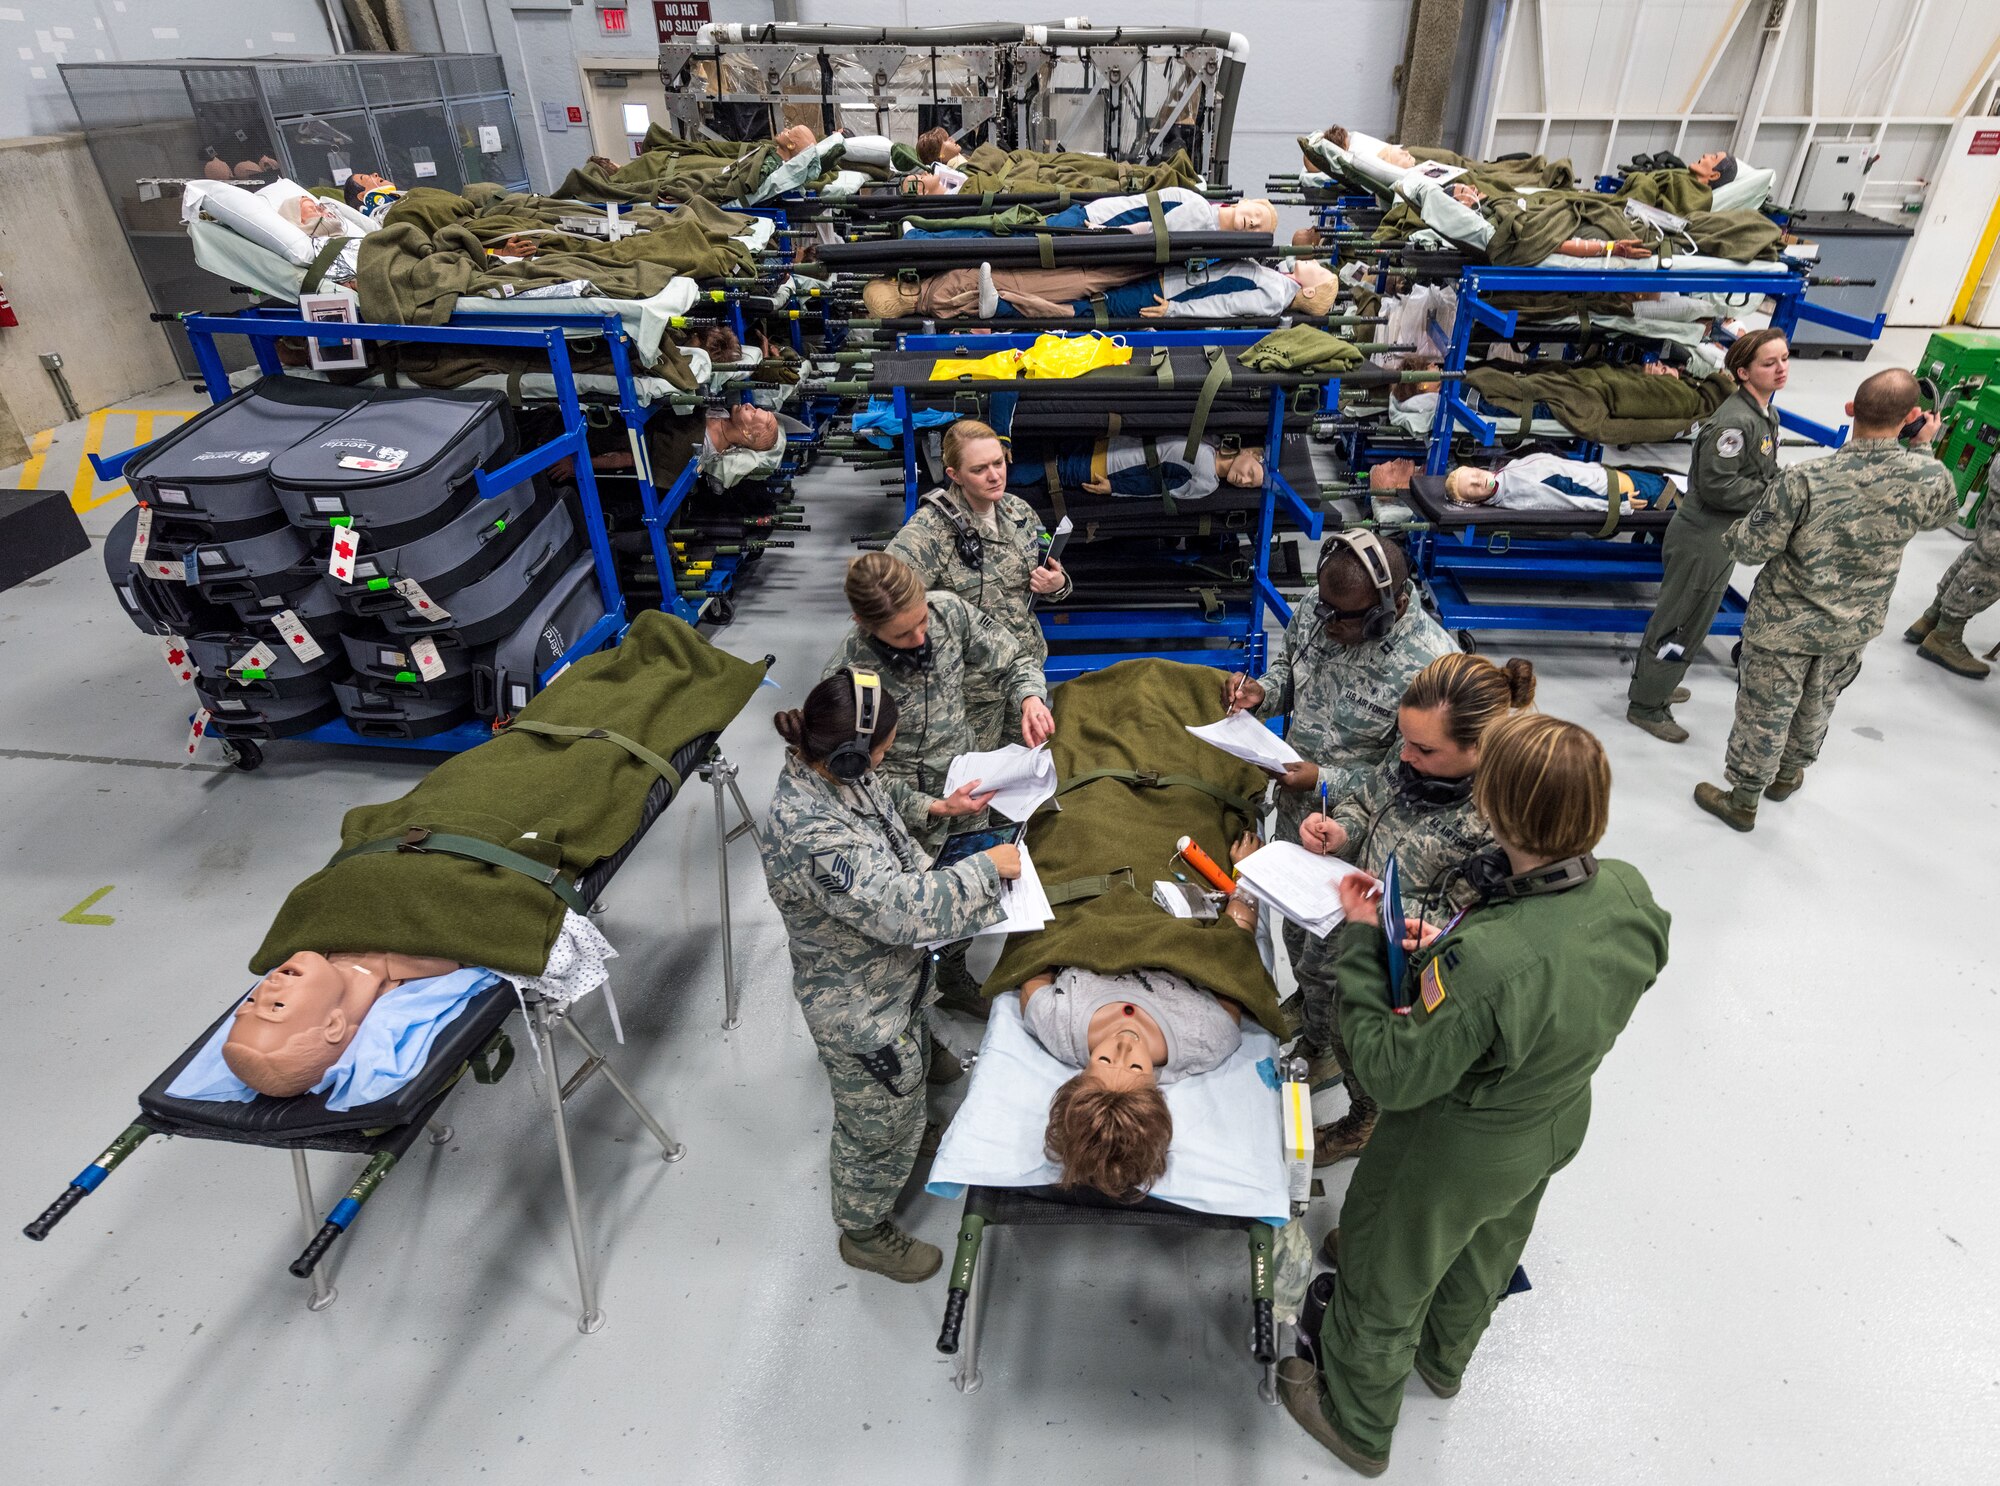 Flight Nurse and Aeromedical Technician Course students discuss patient briefs from actual Aeromedical Evacuation missions before boarding a C-130 mockup to treat simulated patients at the 711th Human Performance Wing's U.S. Air Force School of Aerospace Medicine at Wright Patterson AFB, Ohio, Jan. 29, 2018. (U.S. Air Force photo by J.M. Eddins Jr.)